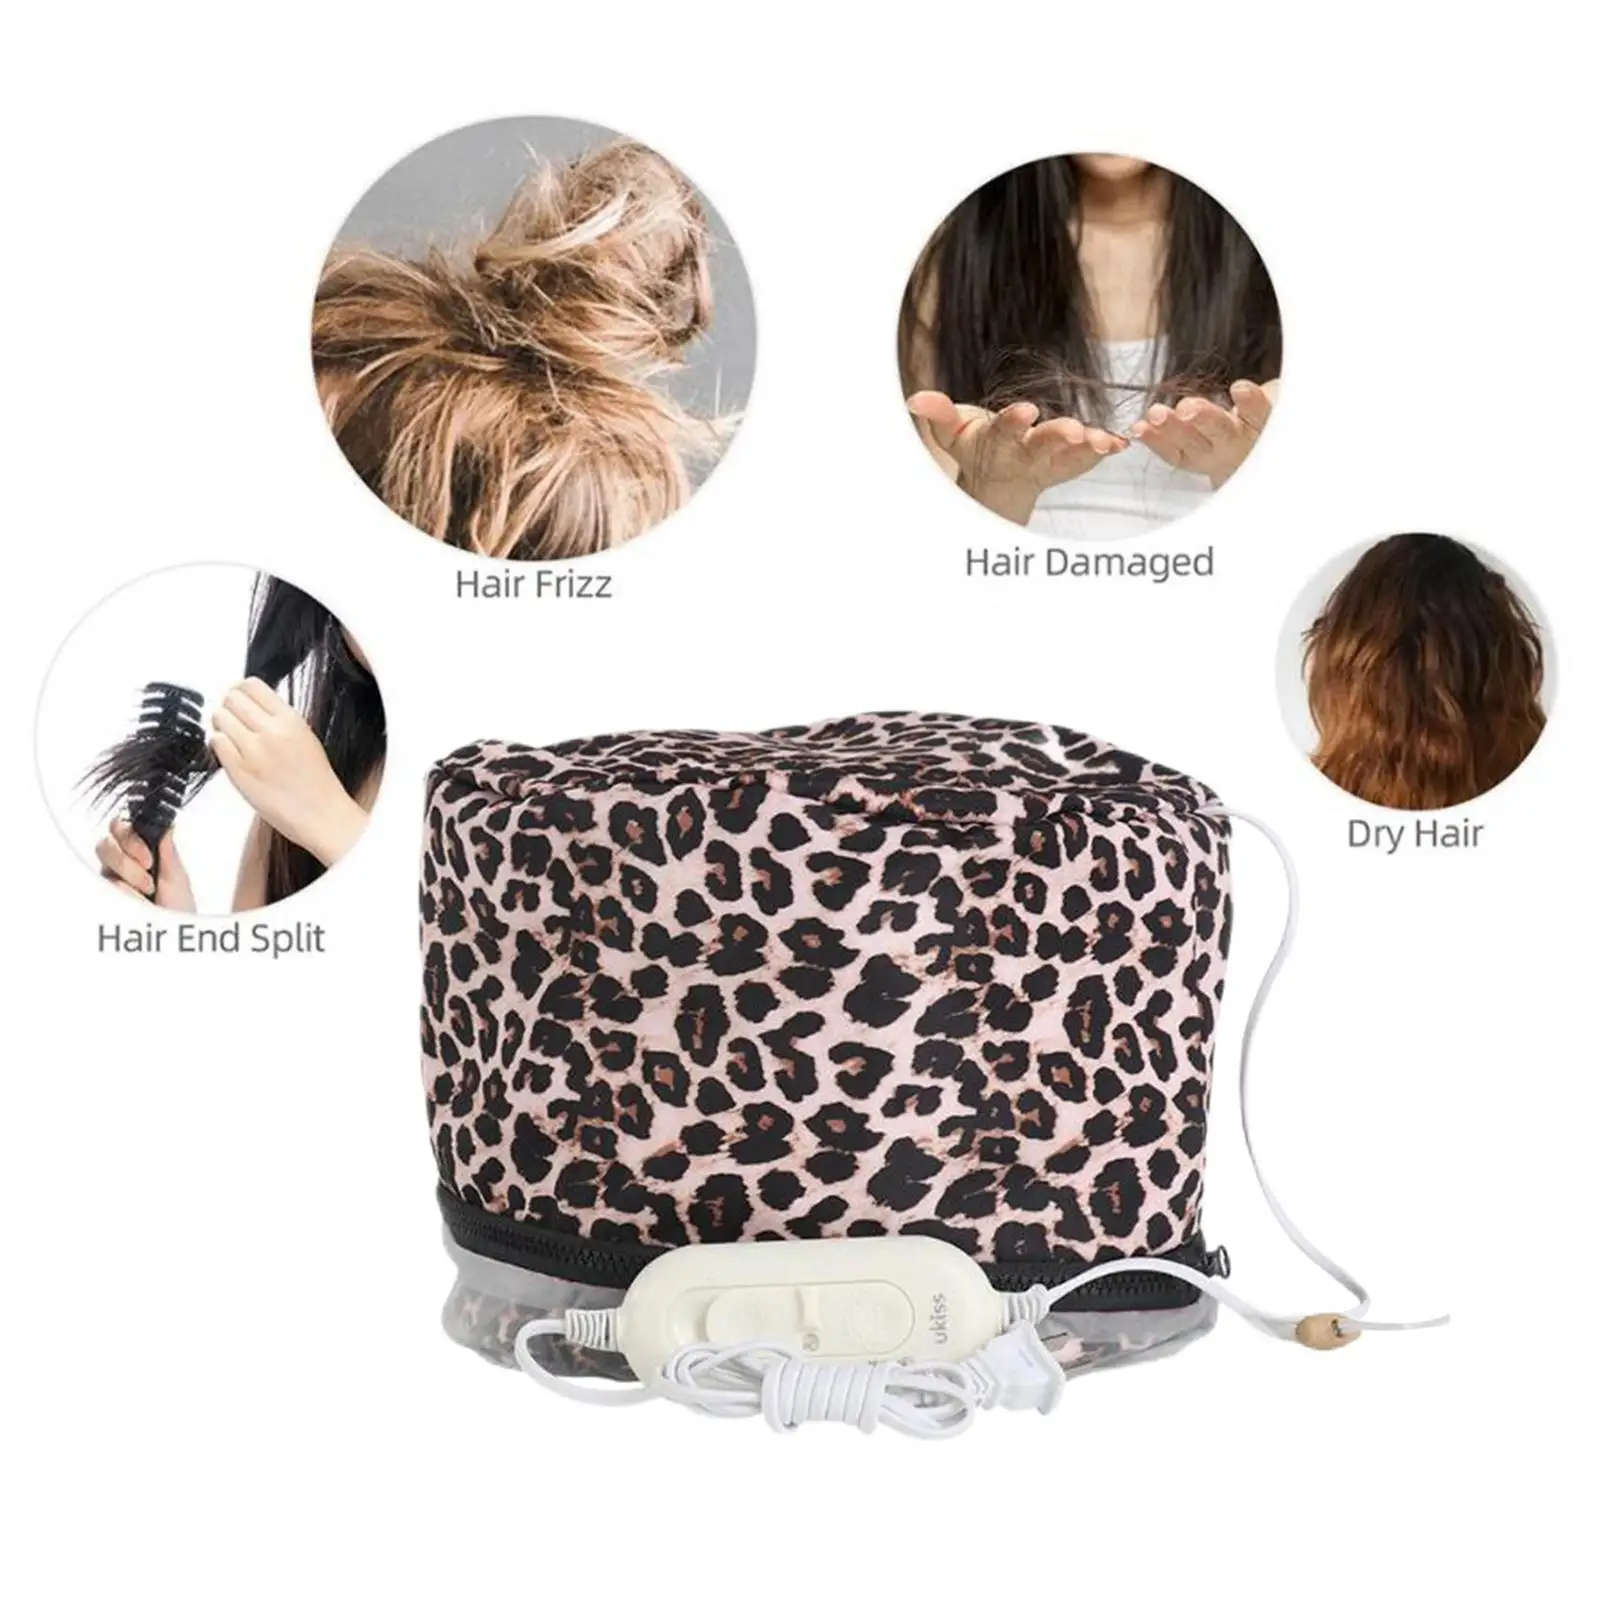 Hair Care Hat Moisturize Hair SPA Nourishing Thermal Hair Caps Personal Care 3 Modes Temperature Control Leopard Print US